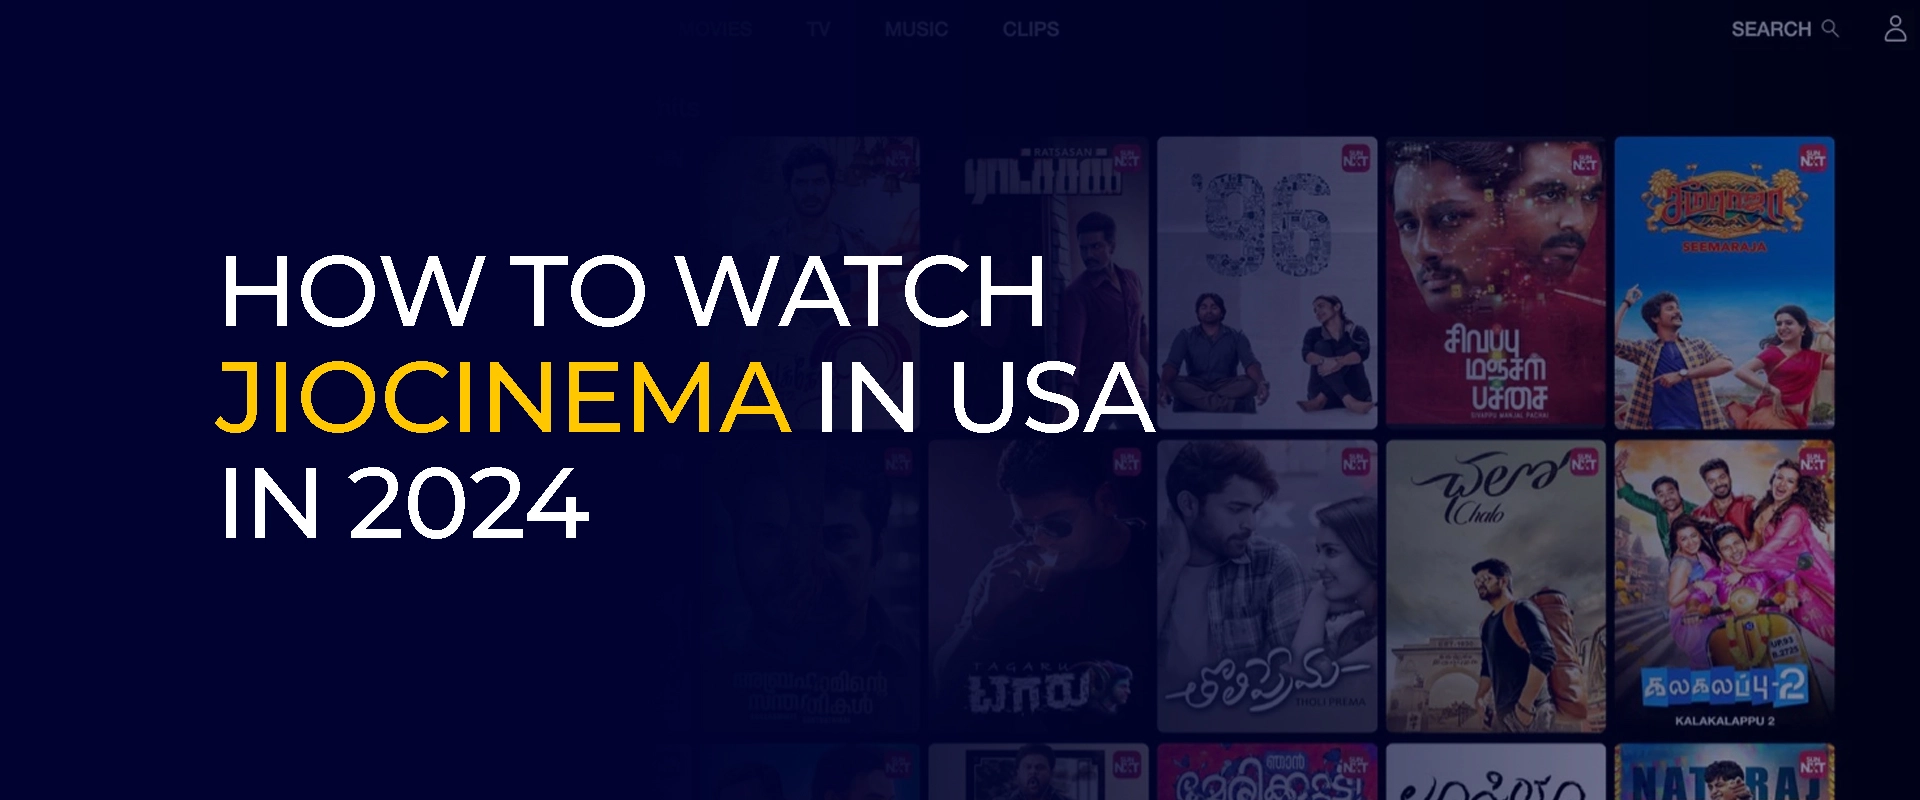 How to Watch JioCinema in USA in 2024